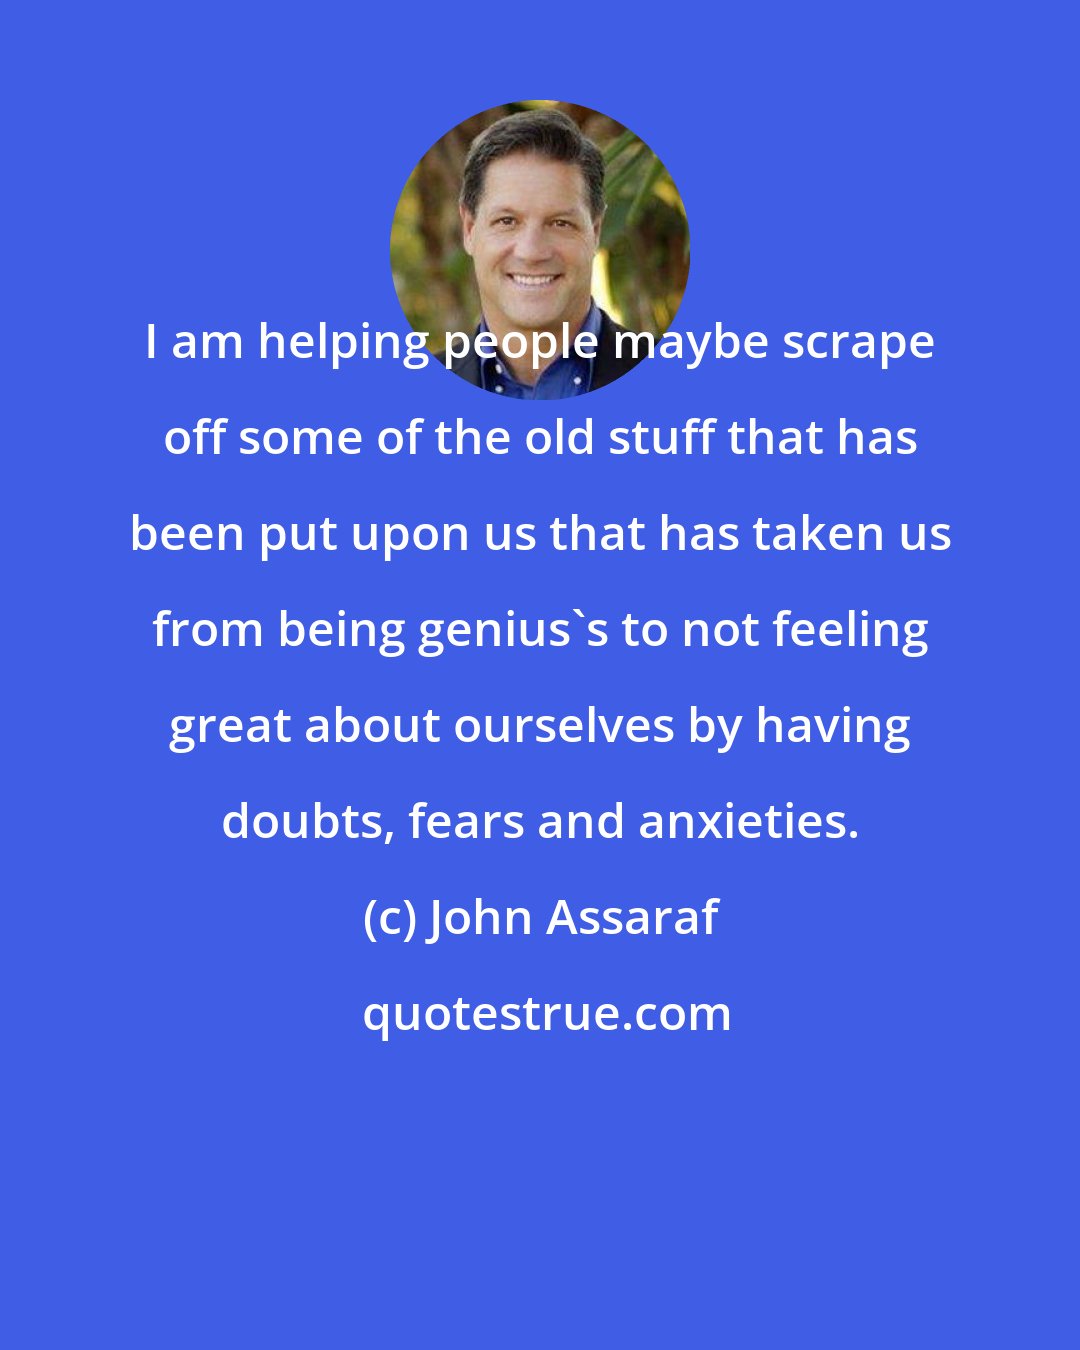 John Assaraf: I am helping people maybe scrape off some of the old stuff that has been put upon us that has taken us from being genius's to not feeling great about ourselves by having doubts, fears and anxieties.